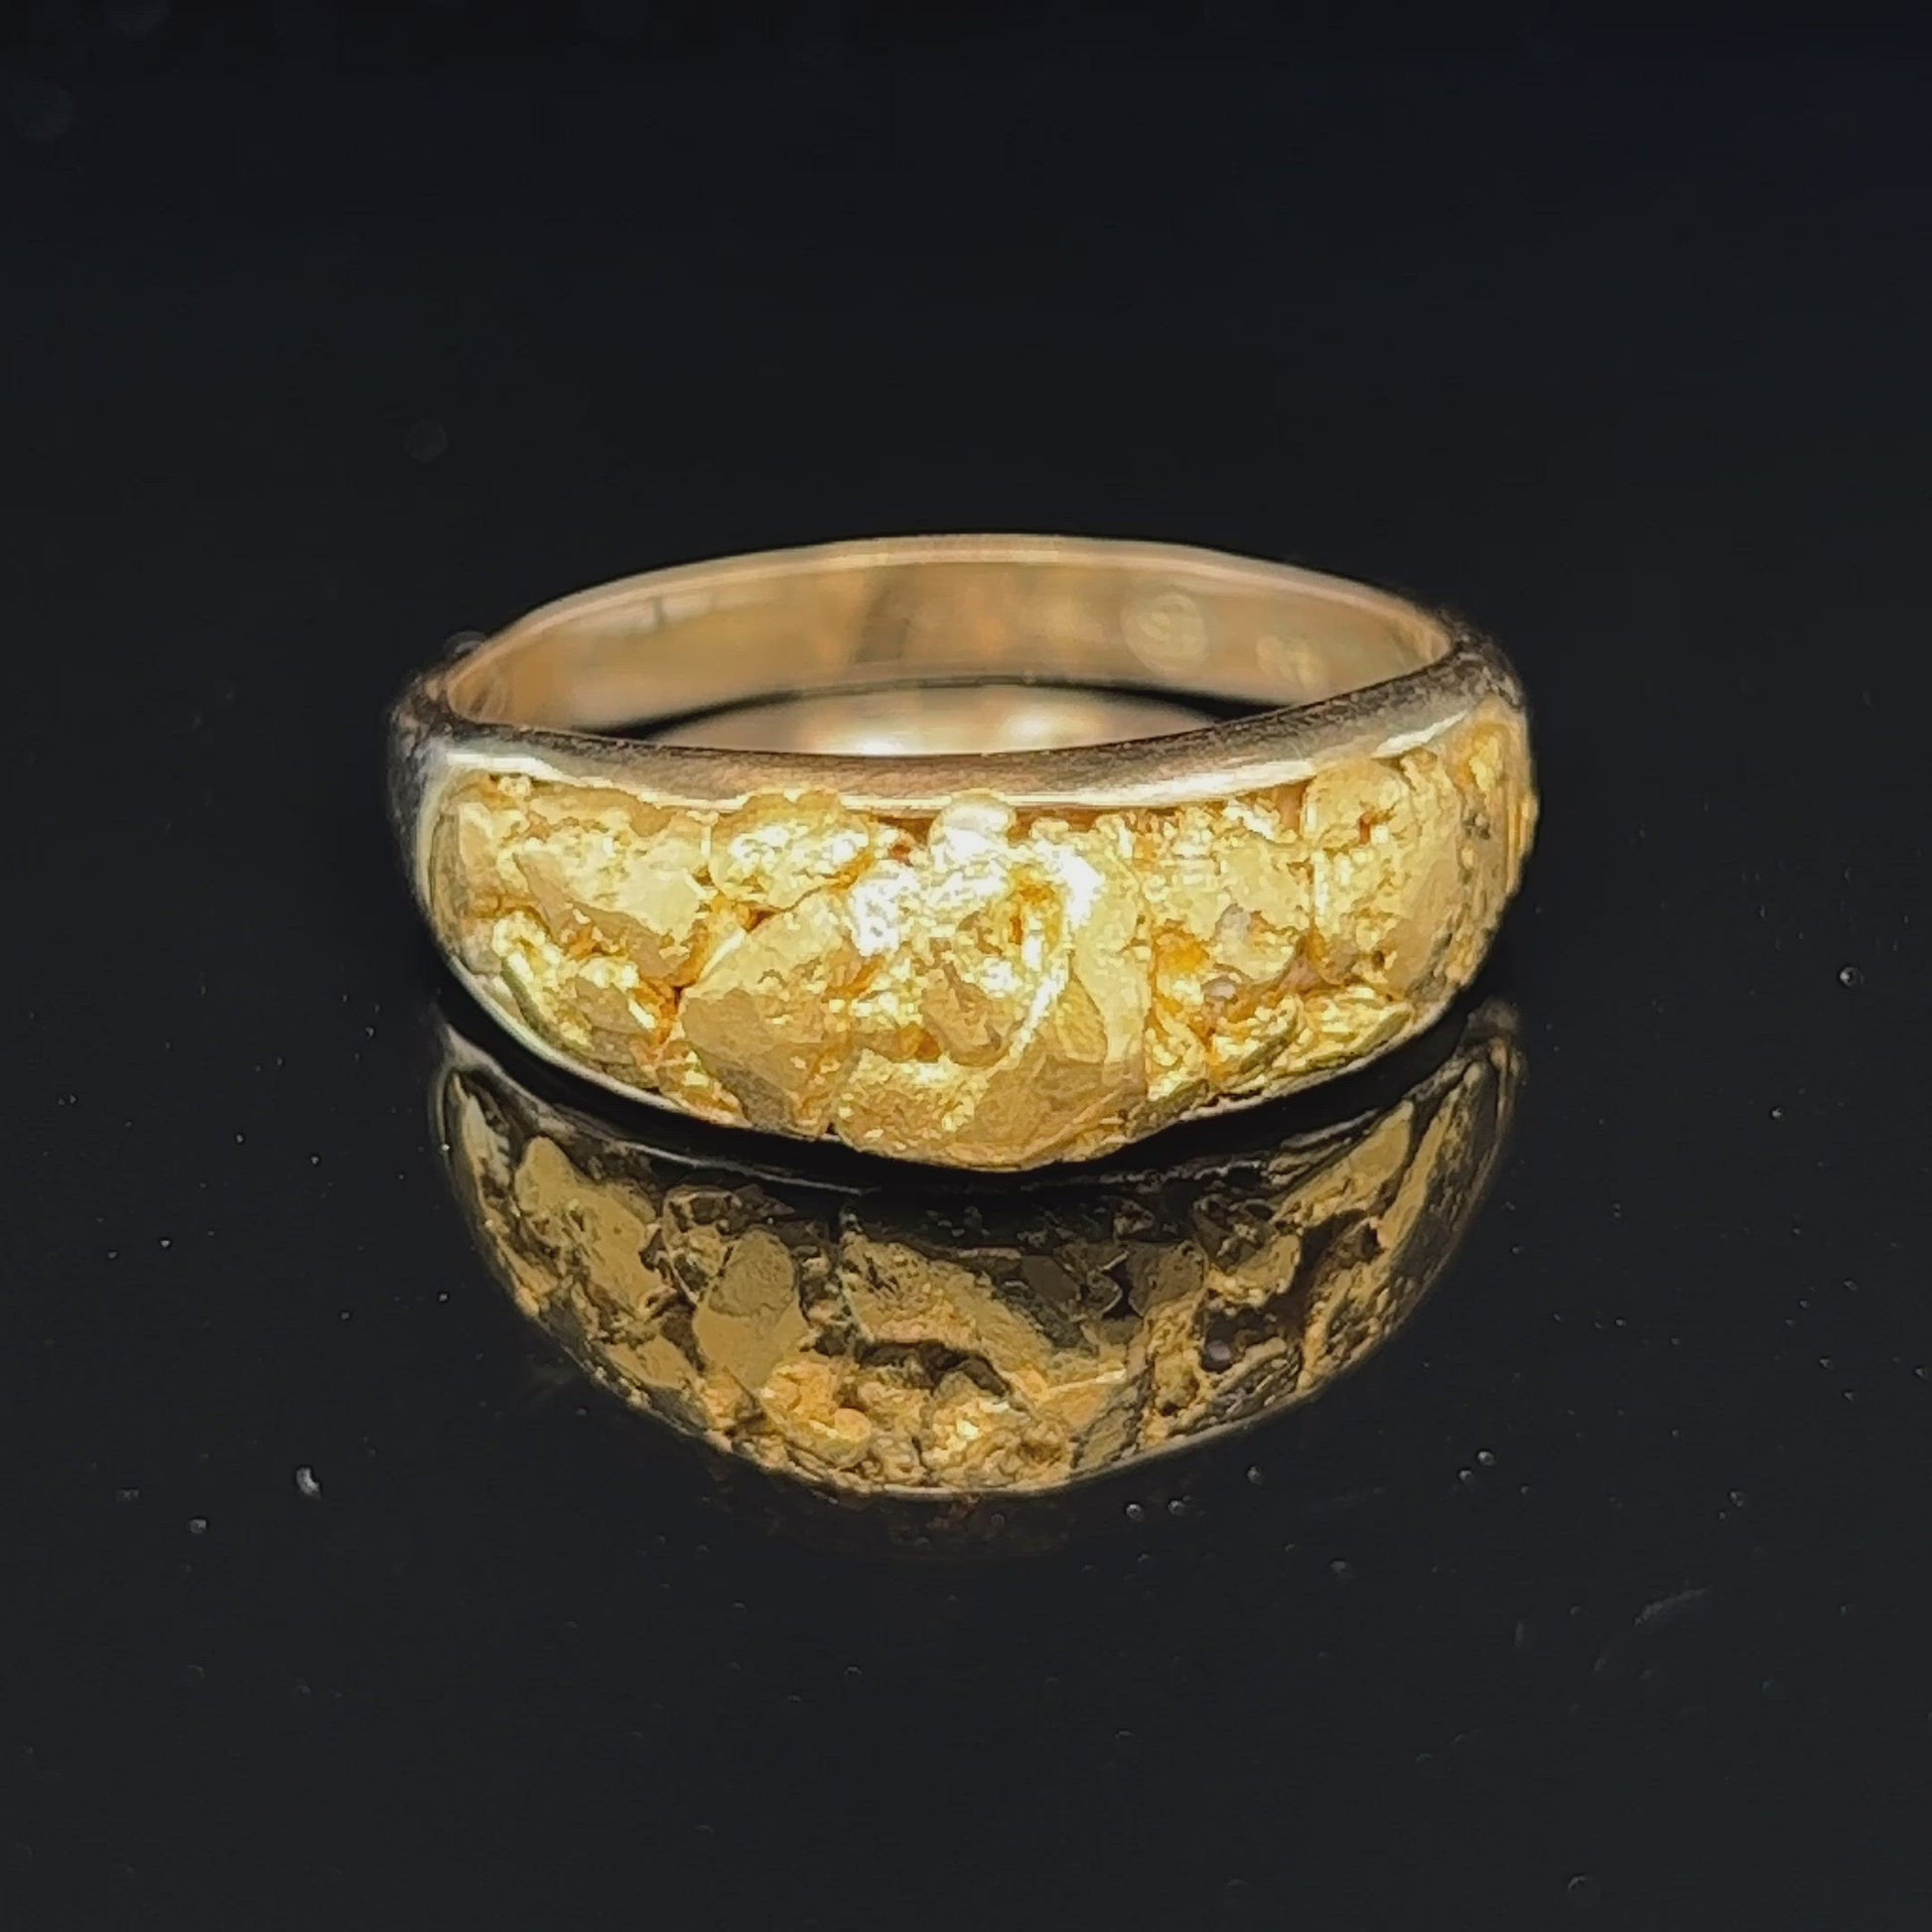 Totally unique handmade ladies gold nugget ring. Finest 9ct Australian gold filled with genuine gold nuggets from the Victorian goldfields. Also available in a mans ring for a matching pair. 3g of Australian 9ct gold and 1.5g of Victorian genuine gold nuggets.